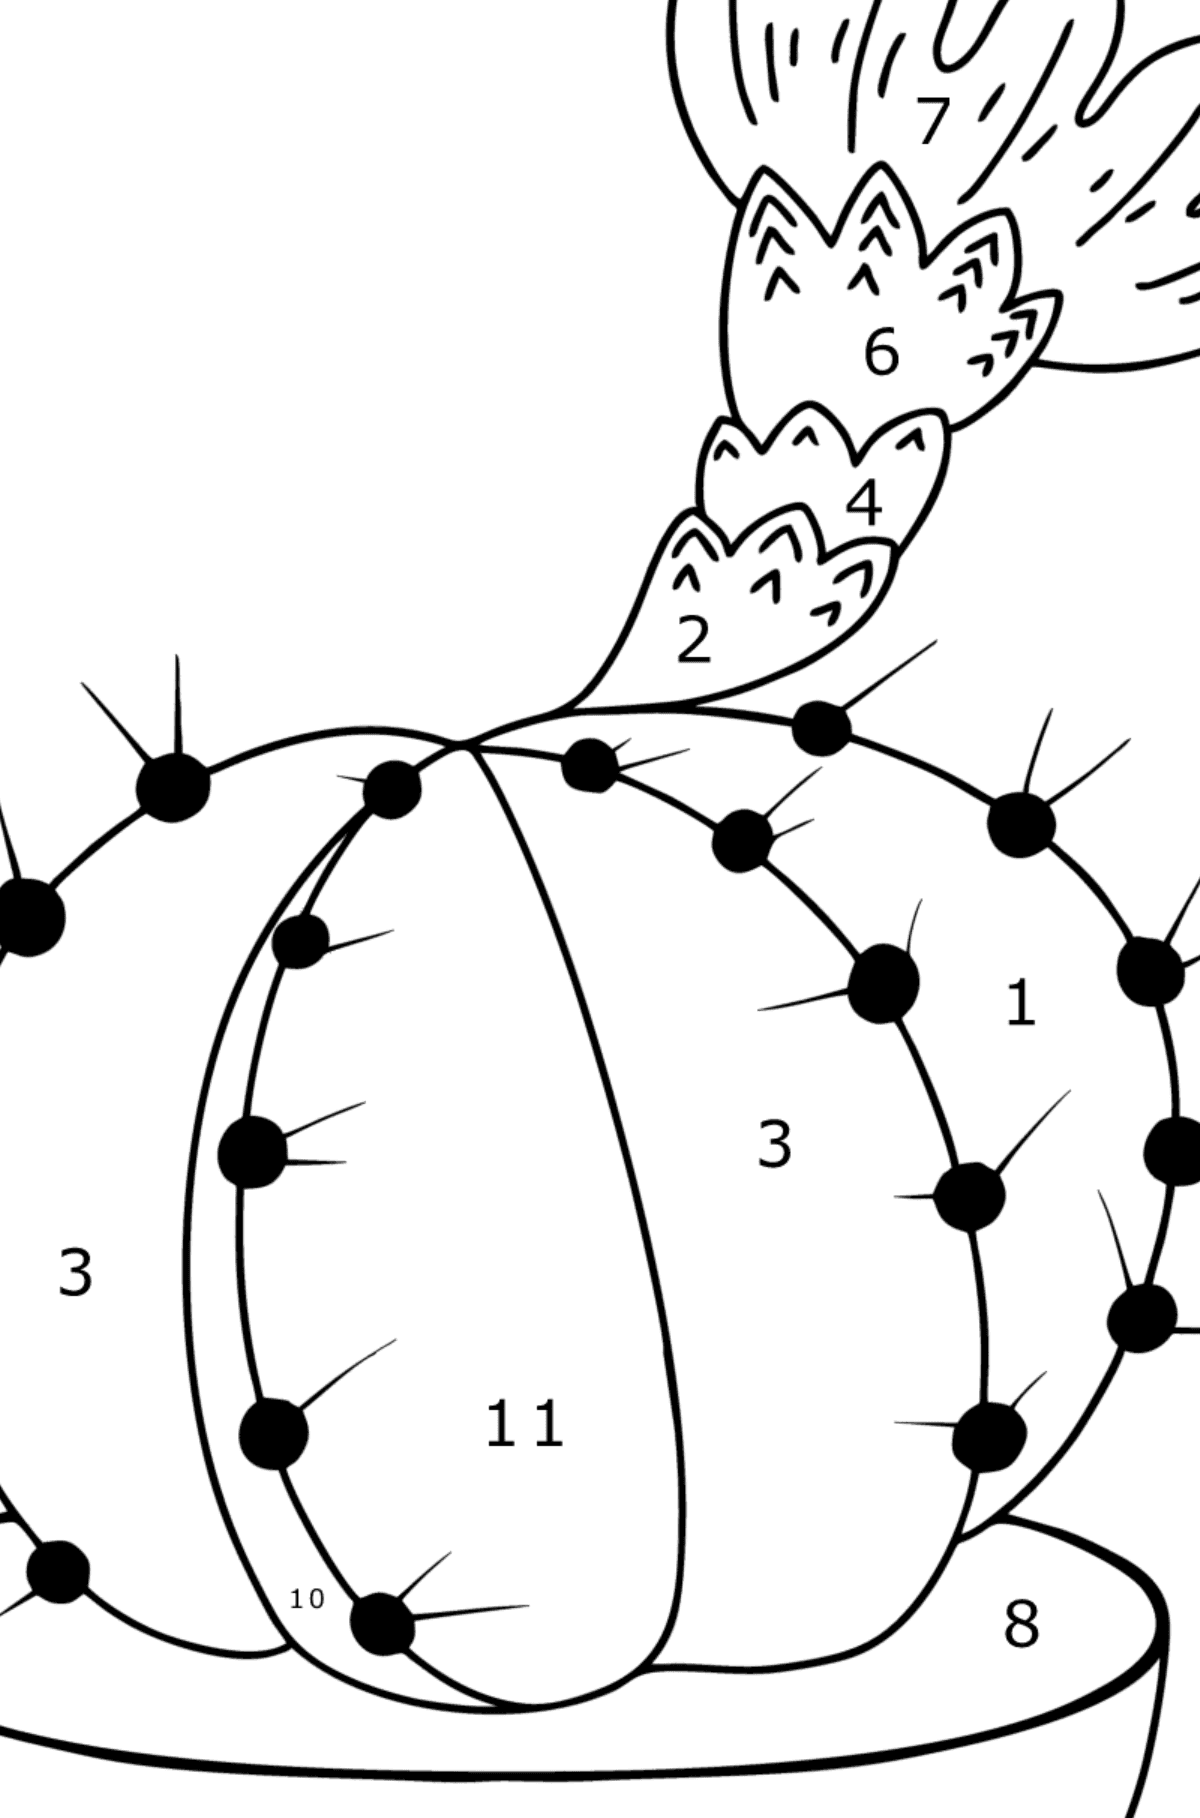 Cute cactus coloring pages - Coloring by Numbers for Kids